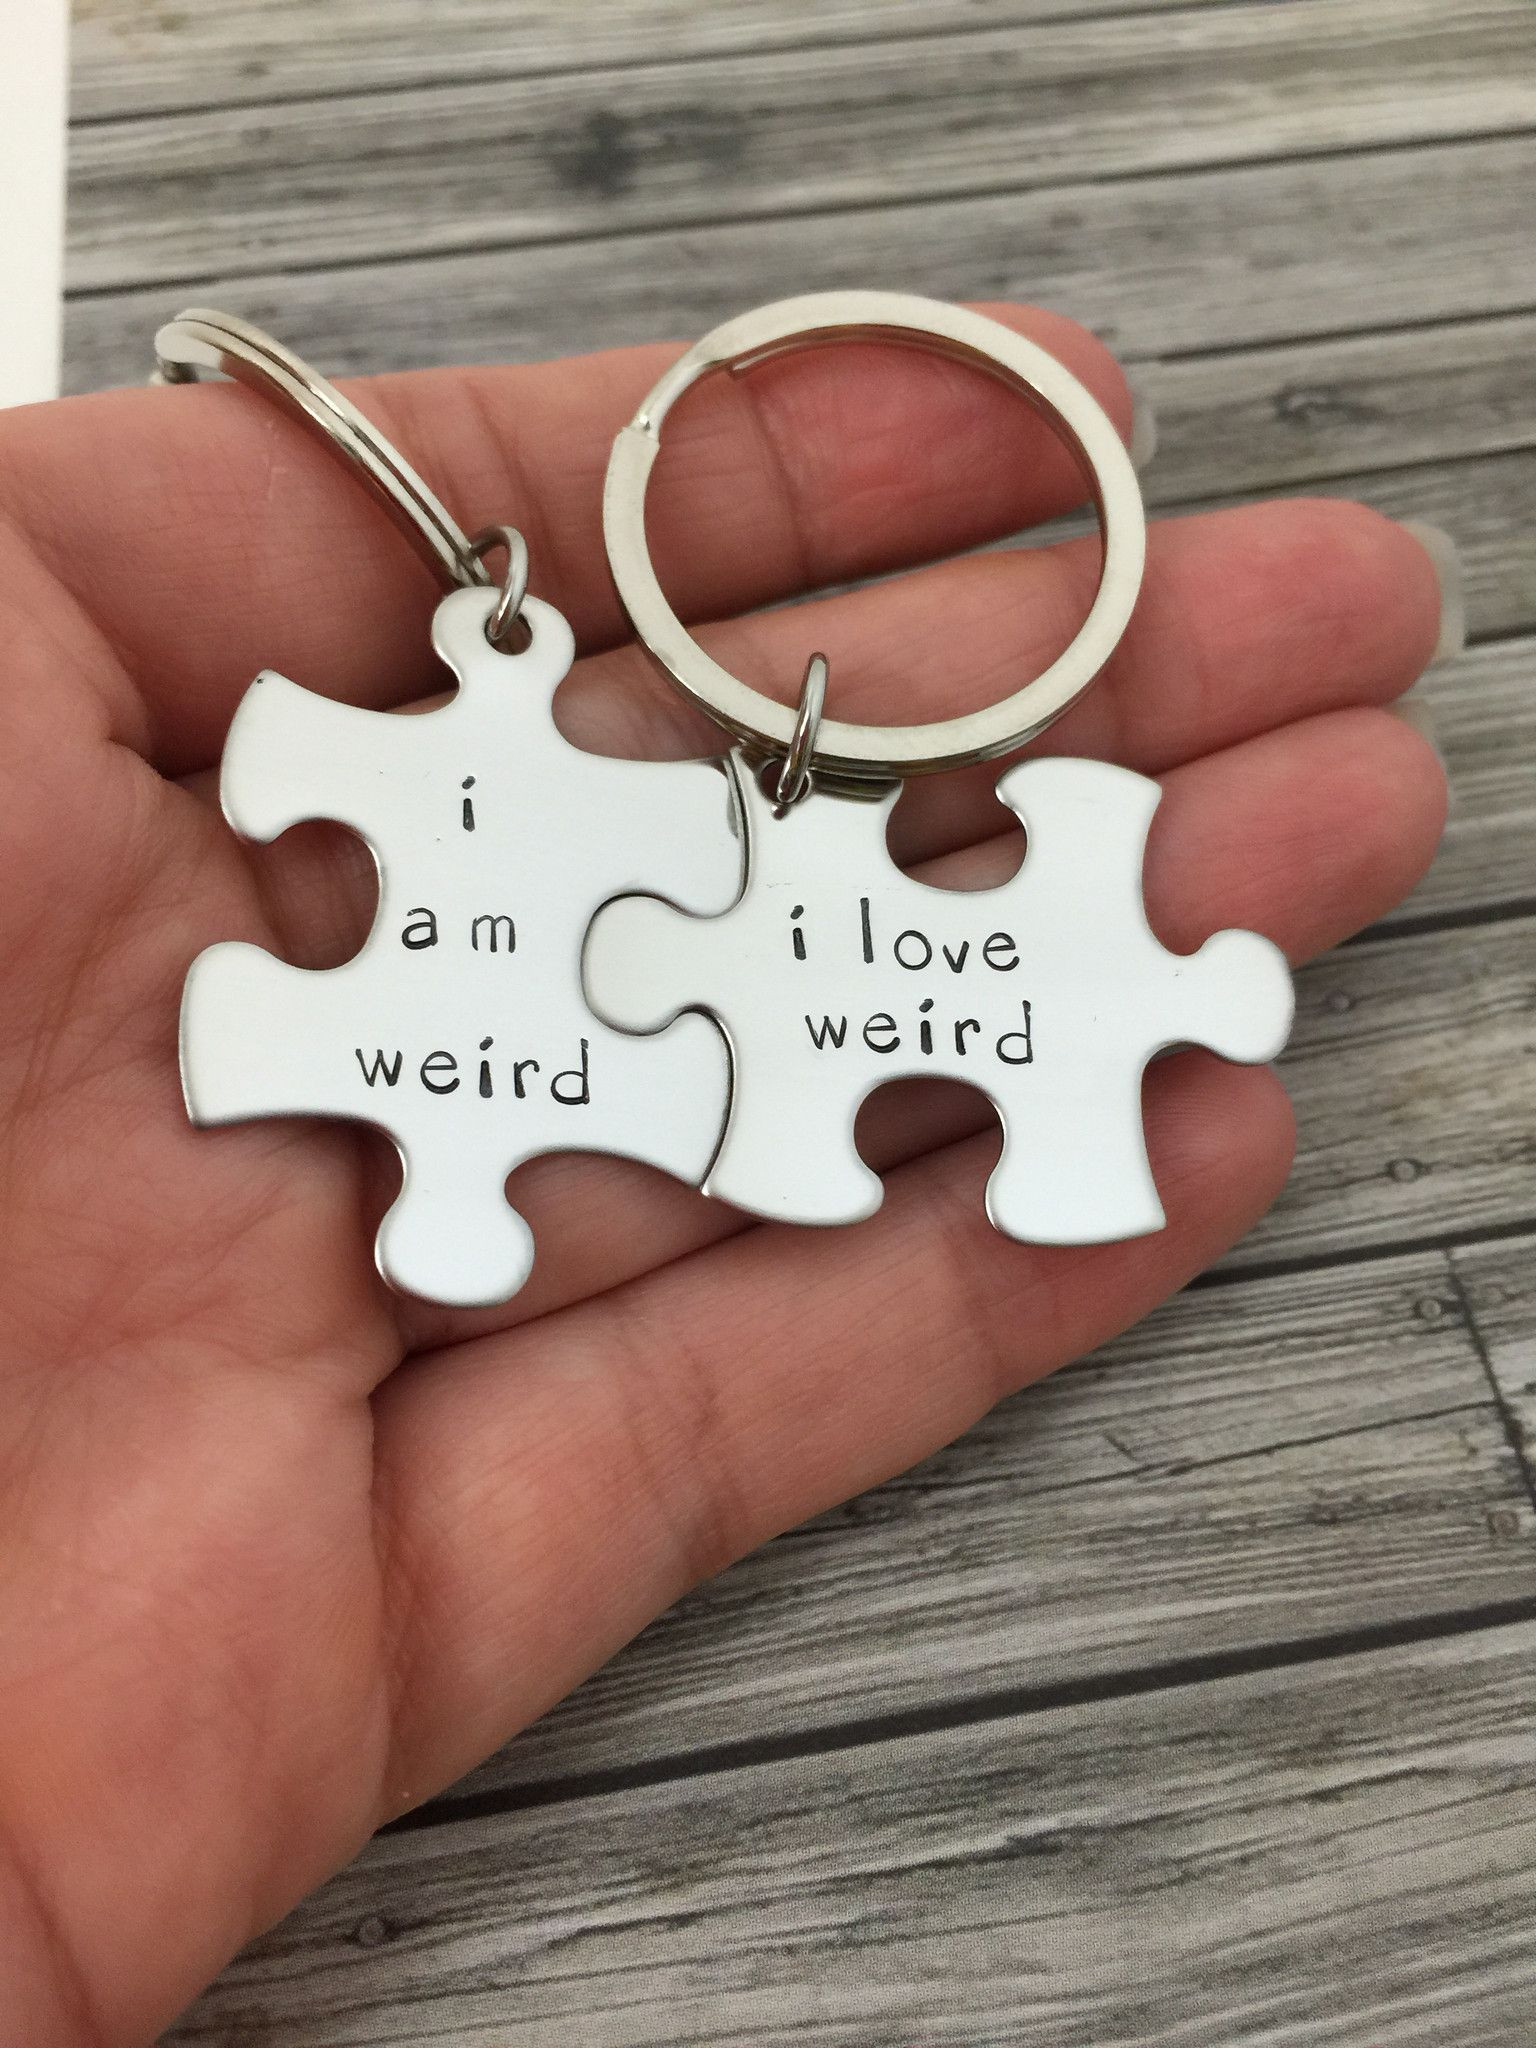 Funny Couple Gift Ideas
 I am weird I love weird Couples Keychains Couples Gift